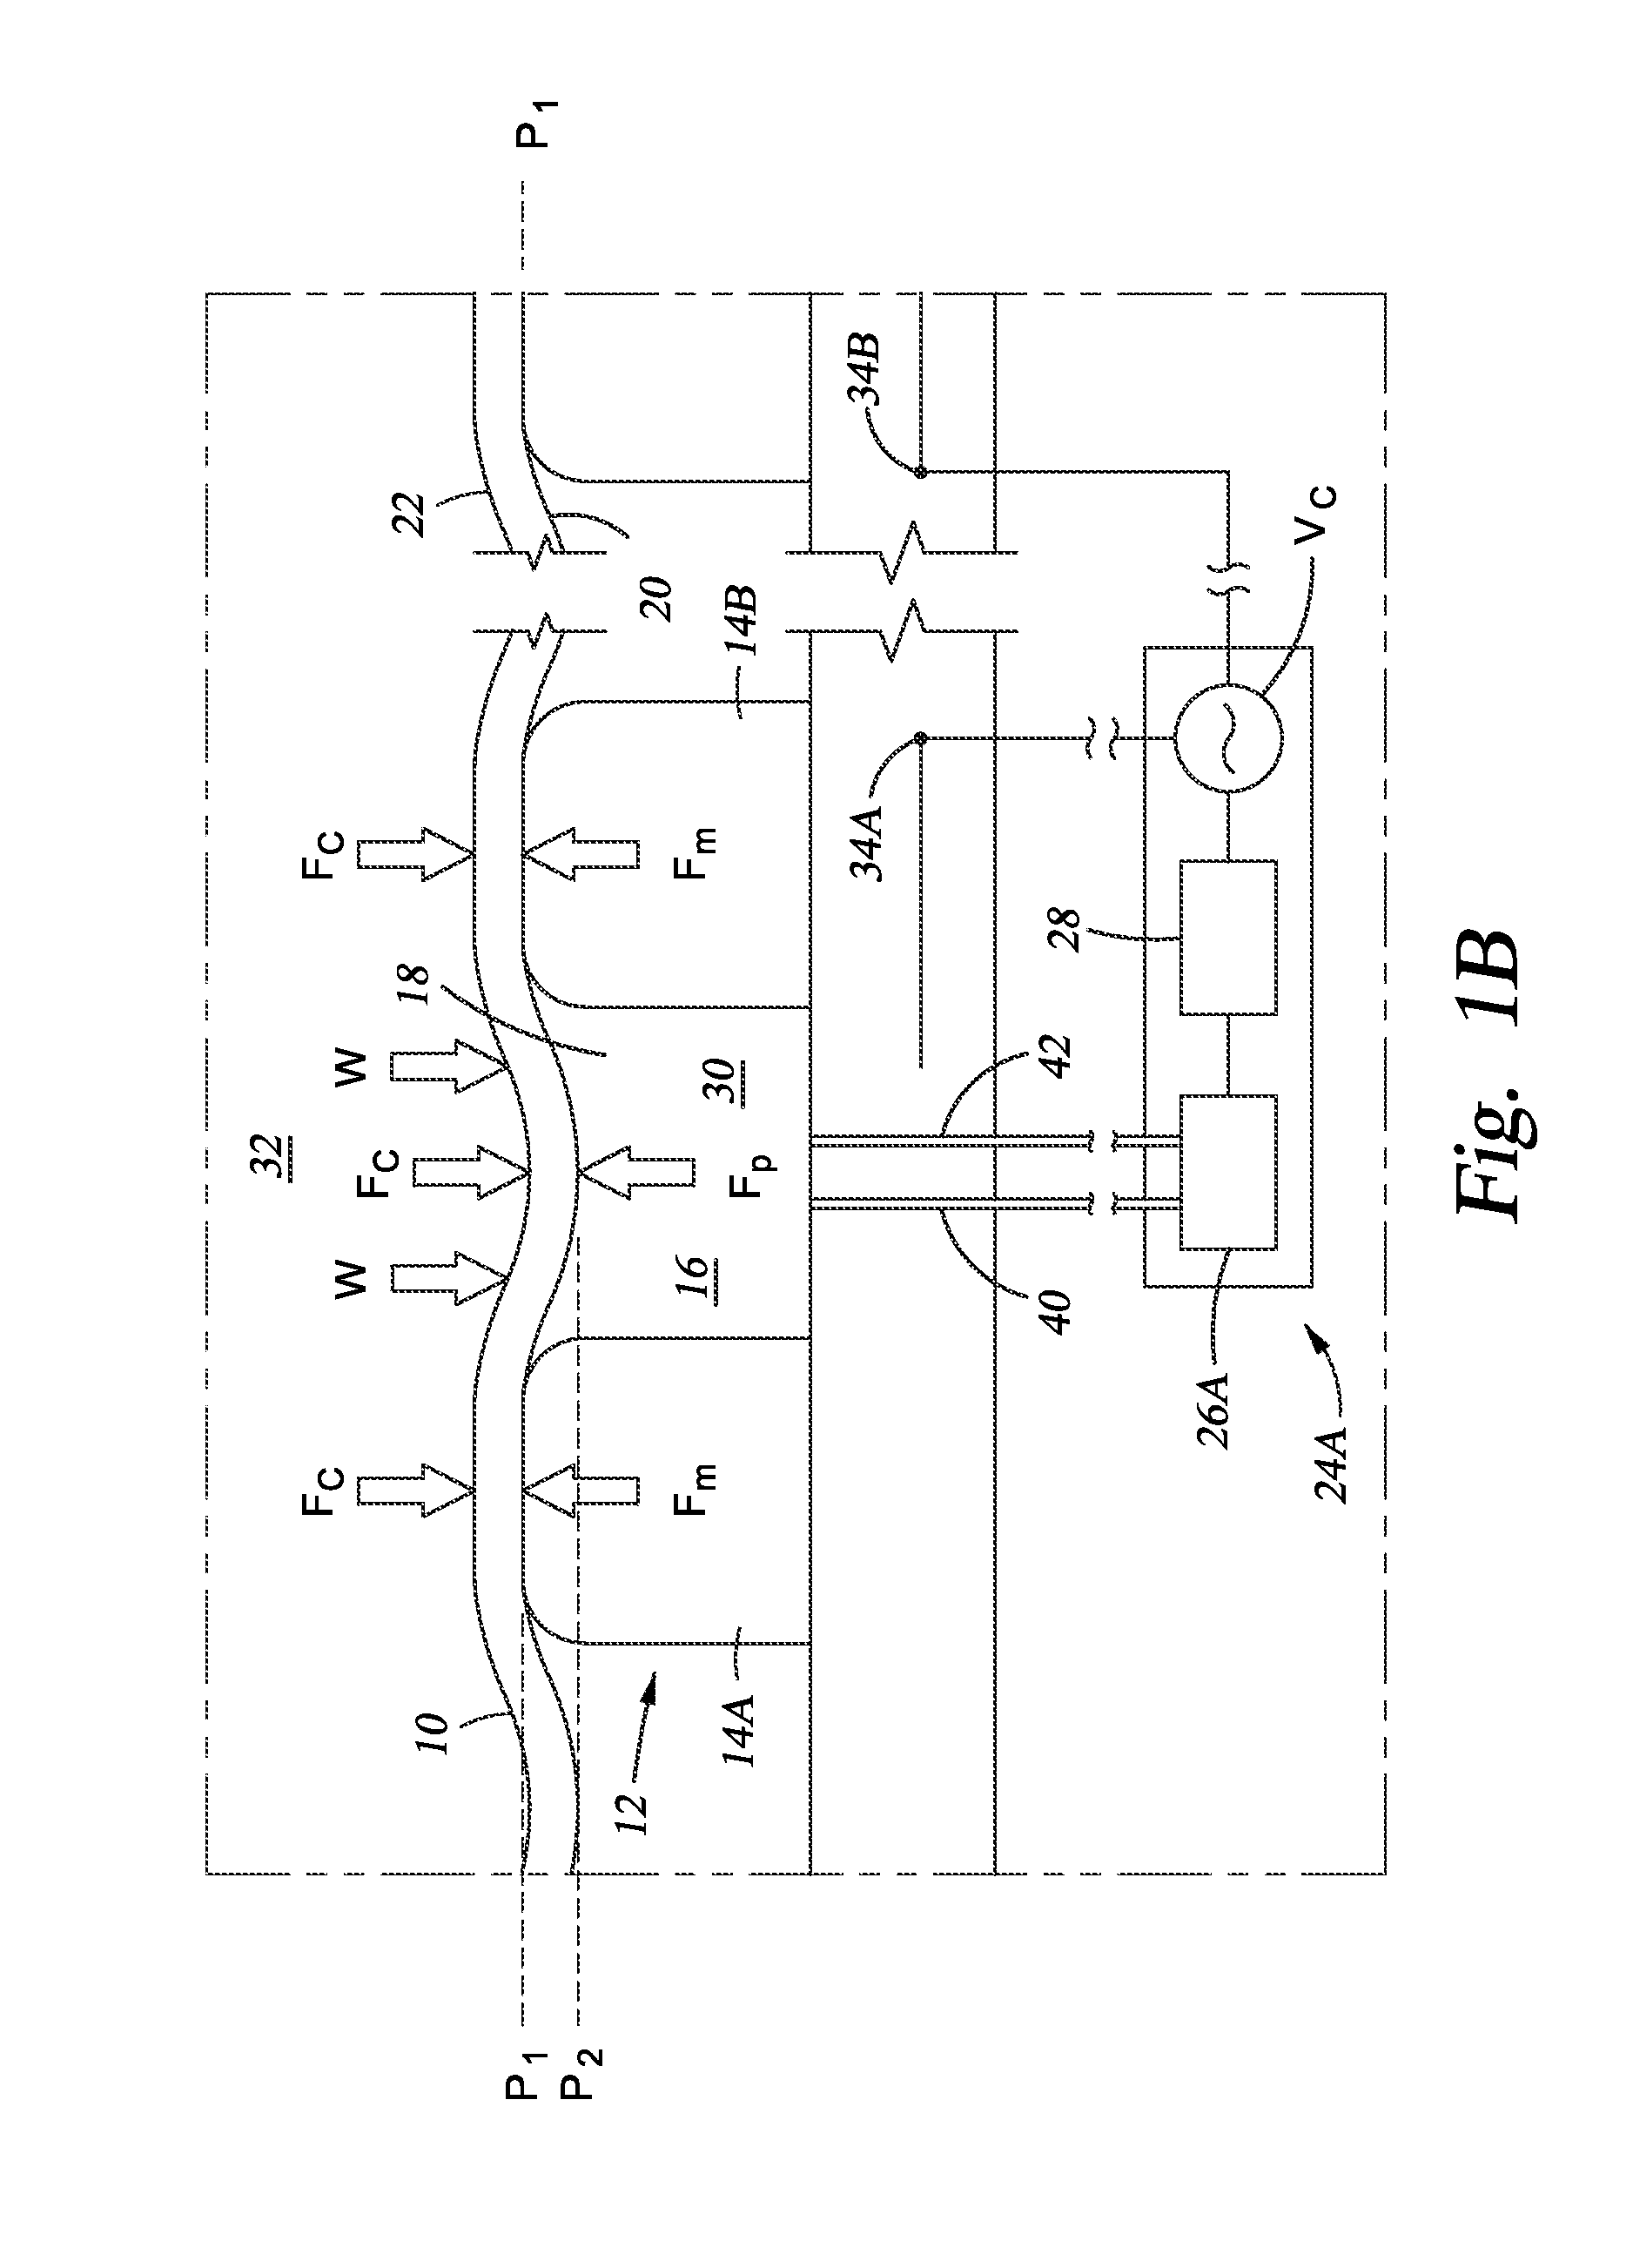 Control systems employing deflection sensors to control clamping forces applied by electrostatic chucks, and related methods